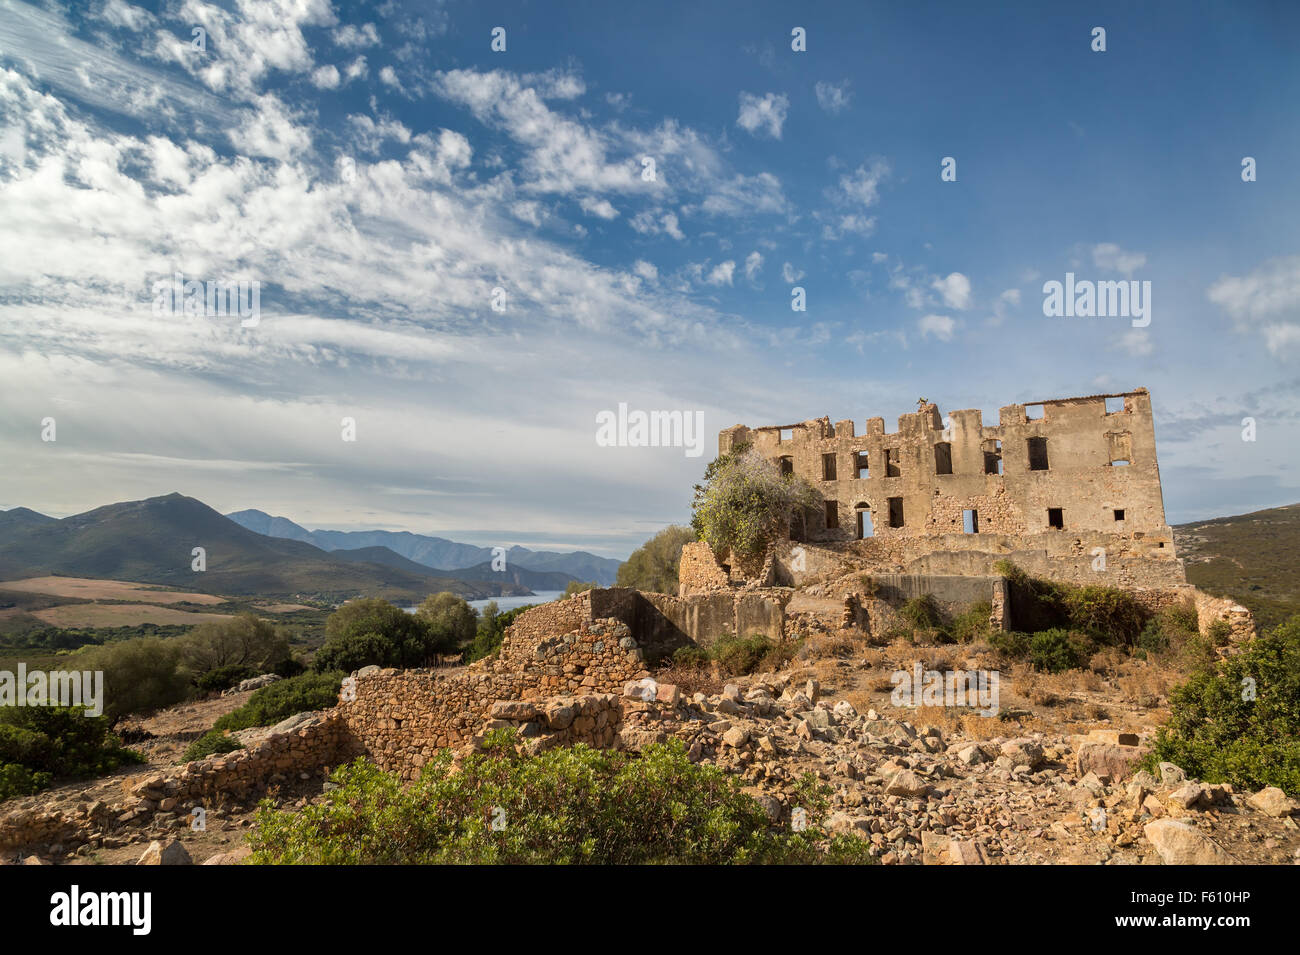 Derelict chateau of Pierre-Napoleon Bonaparte at Torre Mozza between Calvi and Galeria with mountains, coastline and blue skies Stock Photo